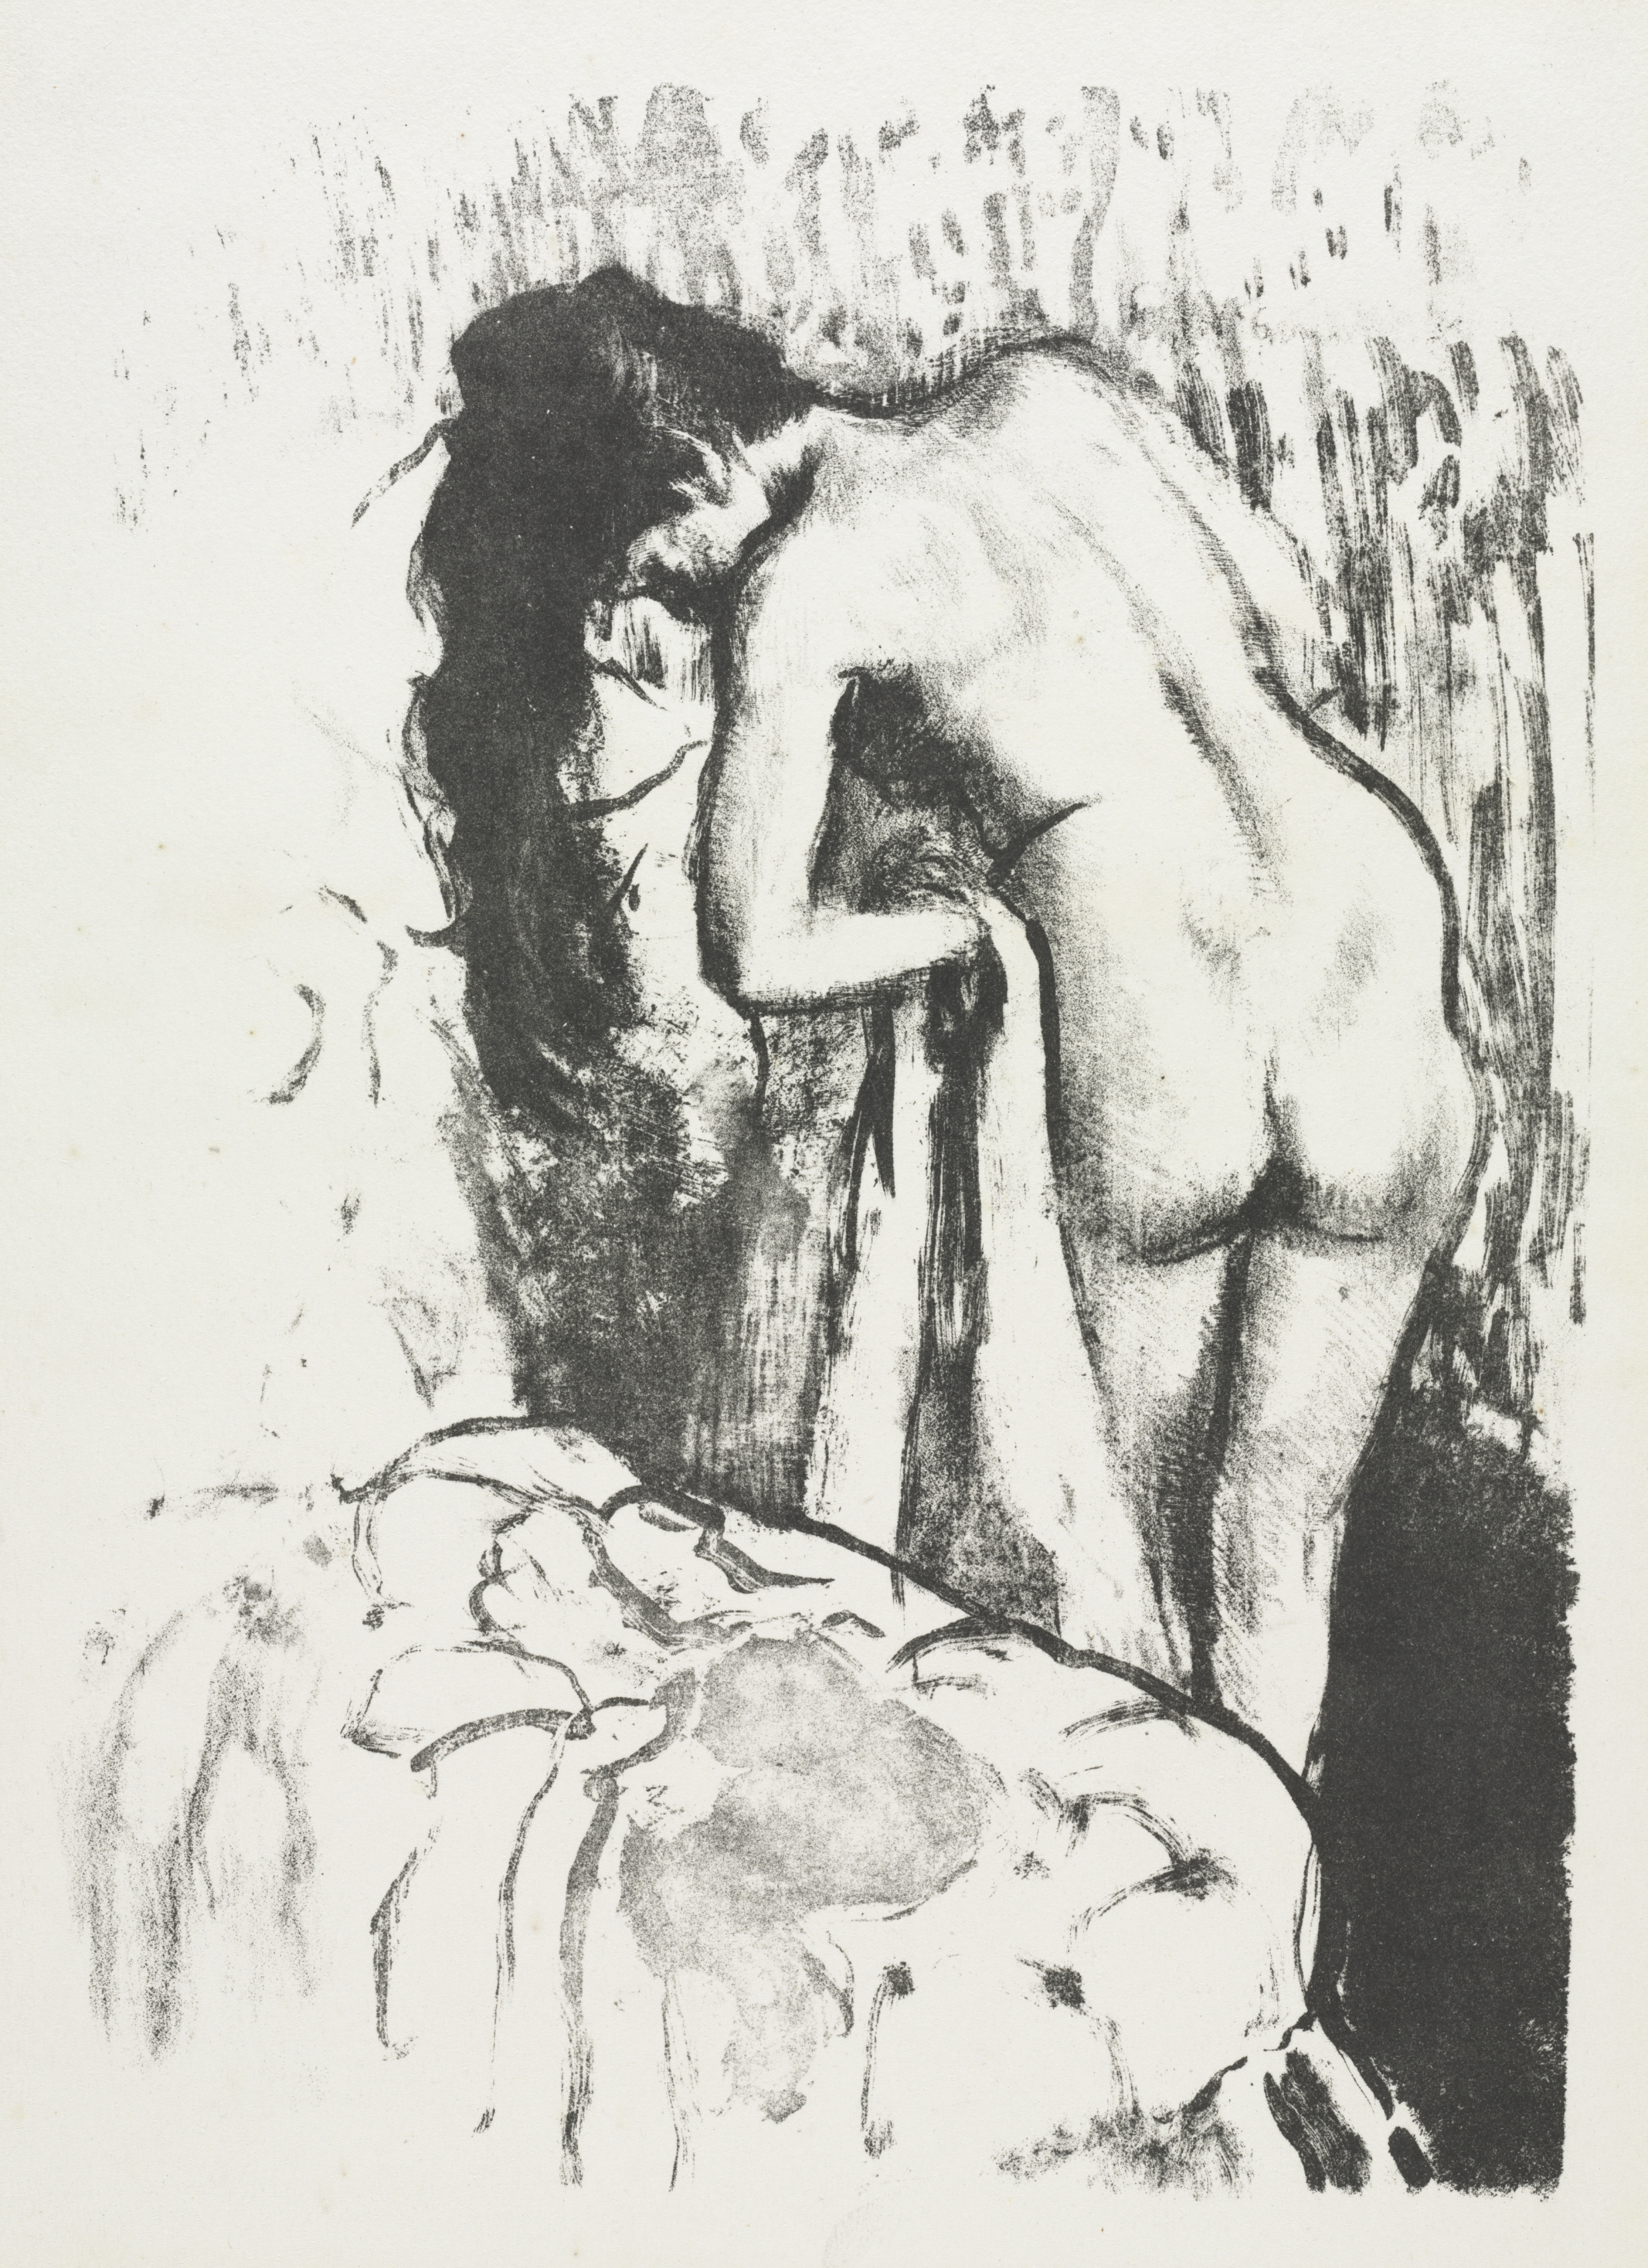 Nude Woman Standing, Drying Herself